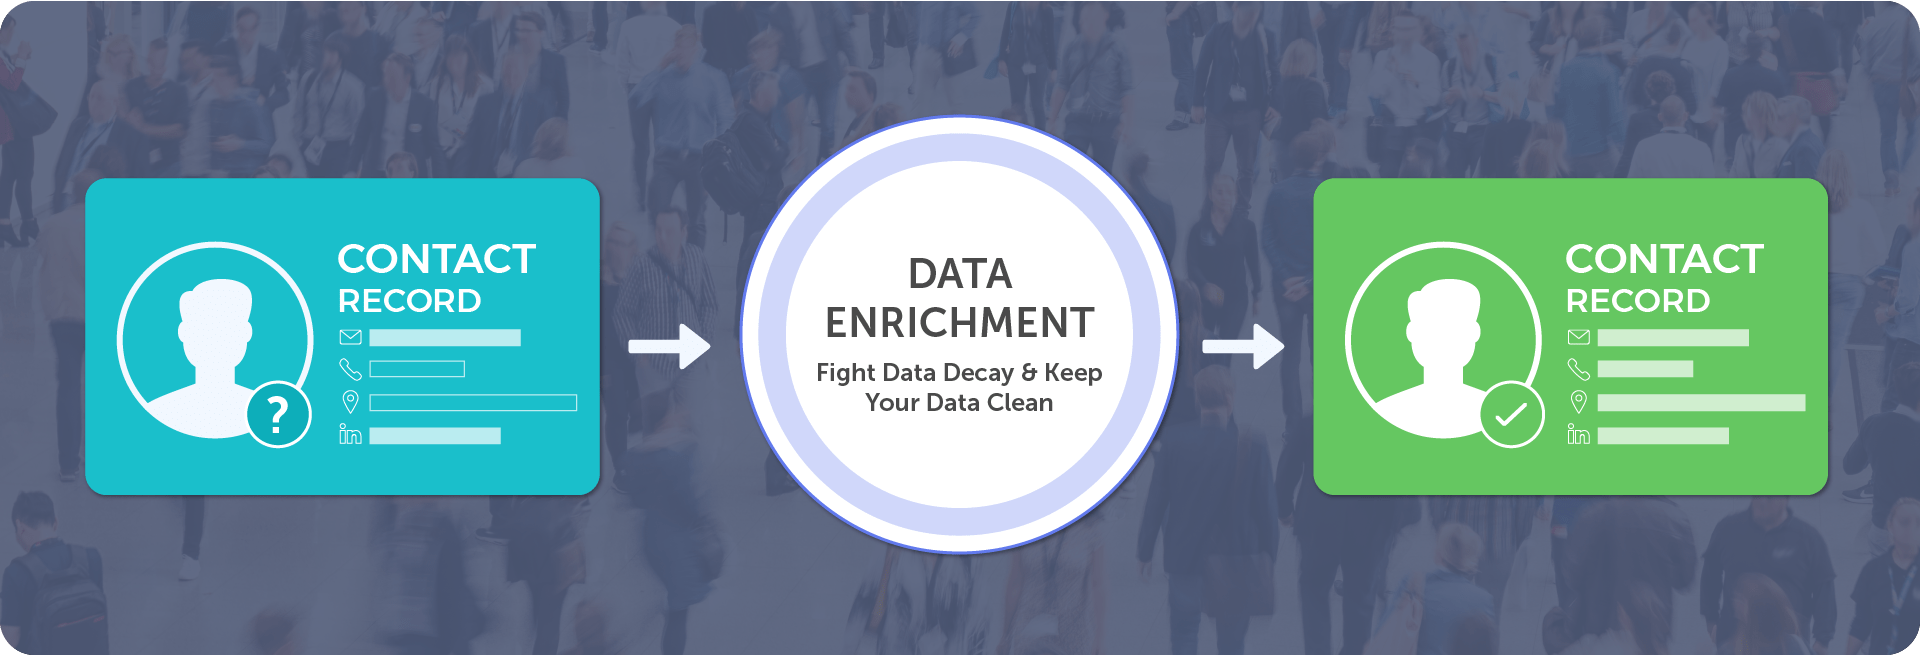 What is Data Enrichment?